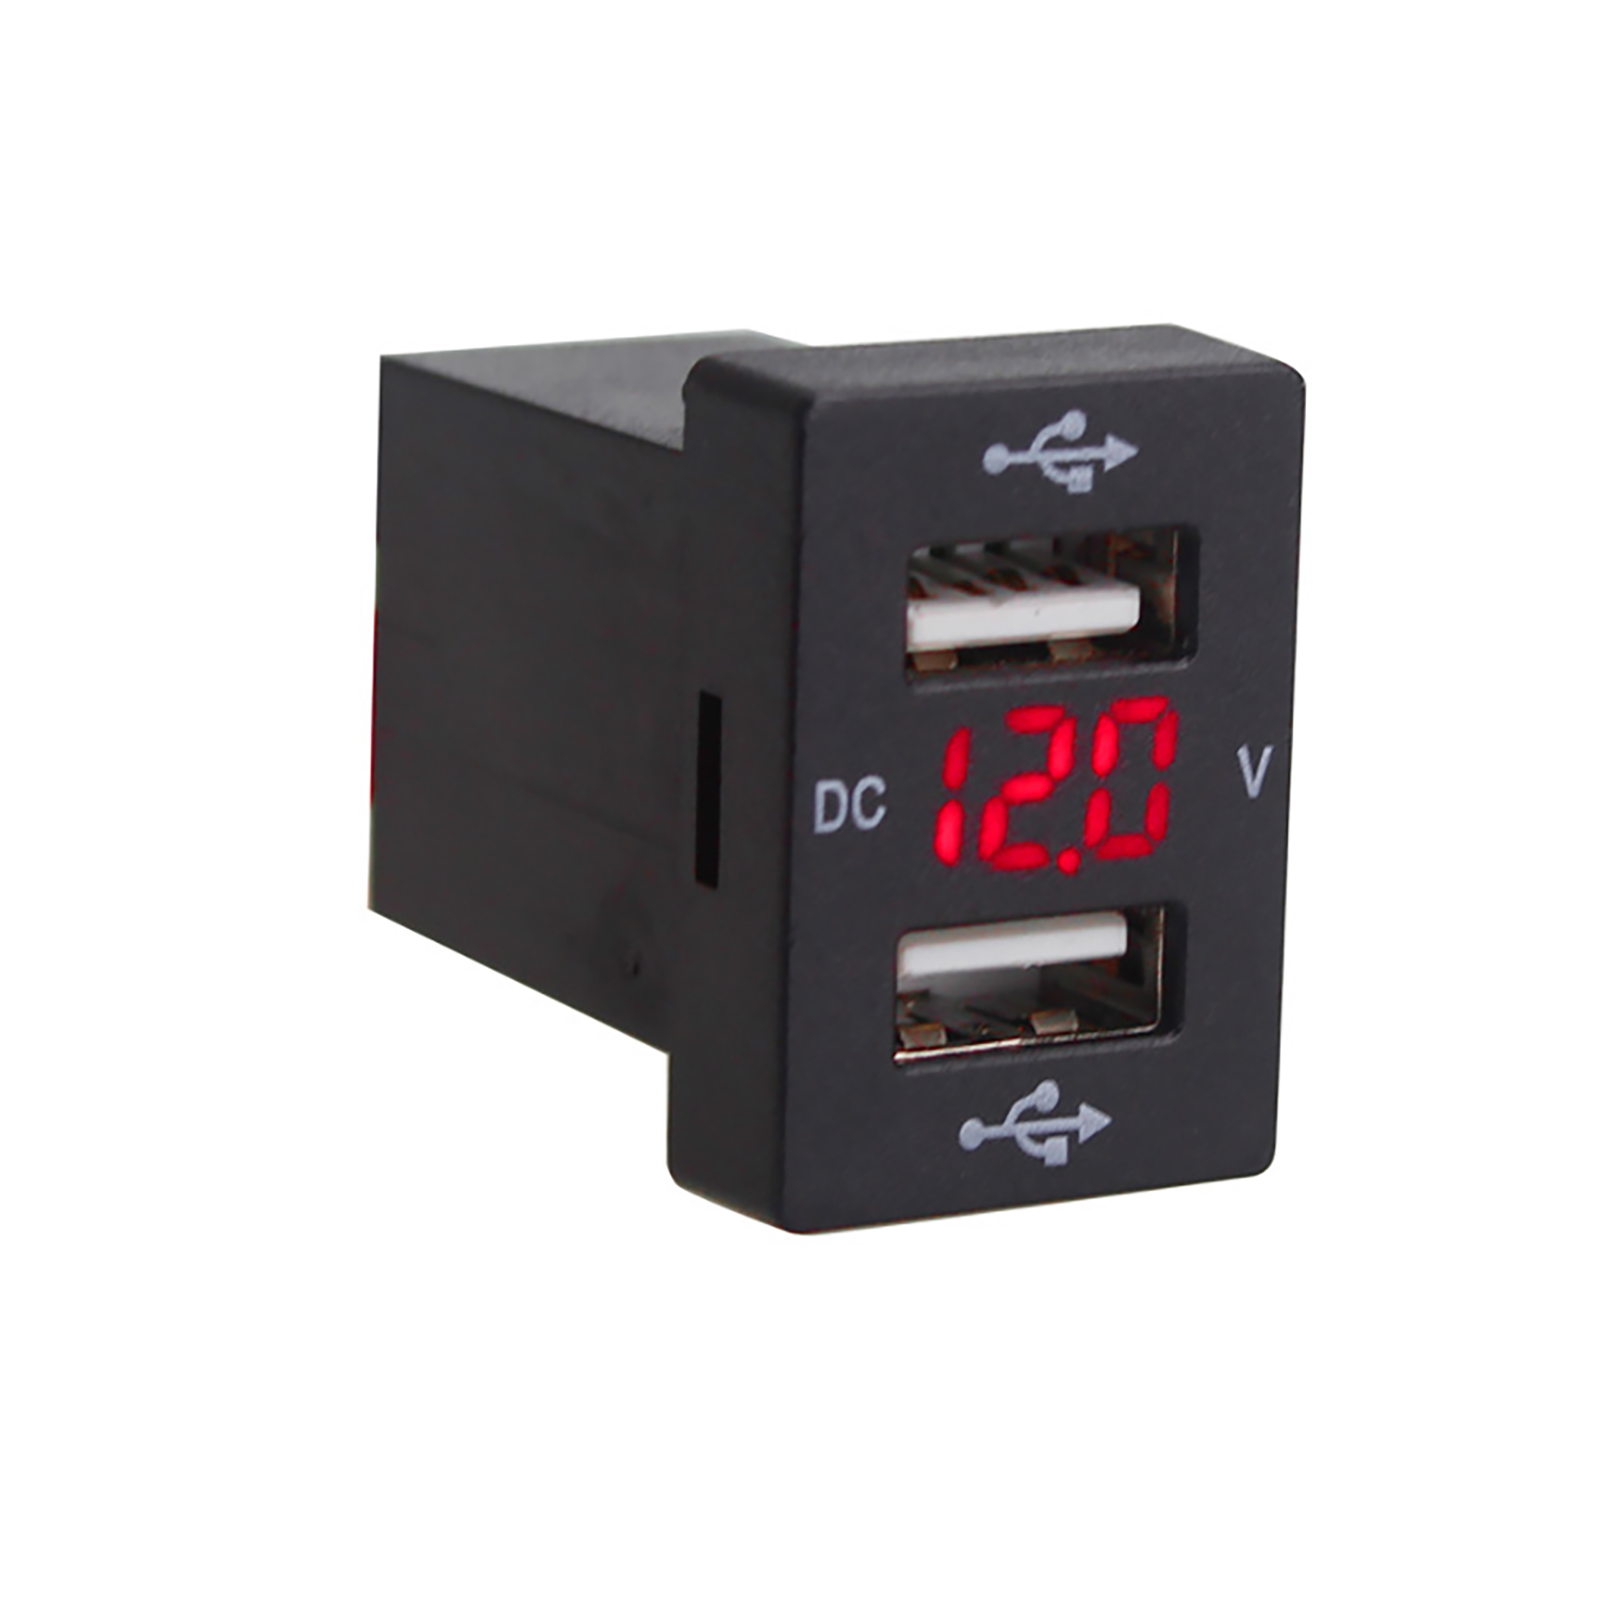 Dual Usb Car Charger Digital Voltmeter Display Real-Time Quick Charge Power Adapter Socket For Mobile Phone red